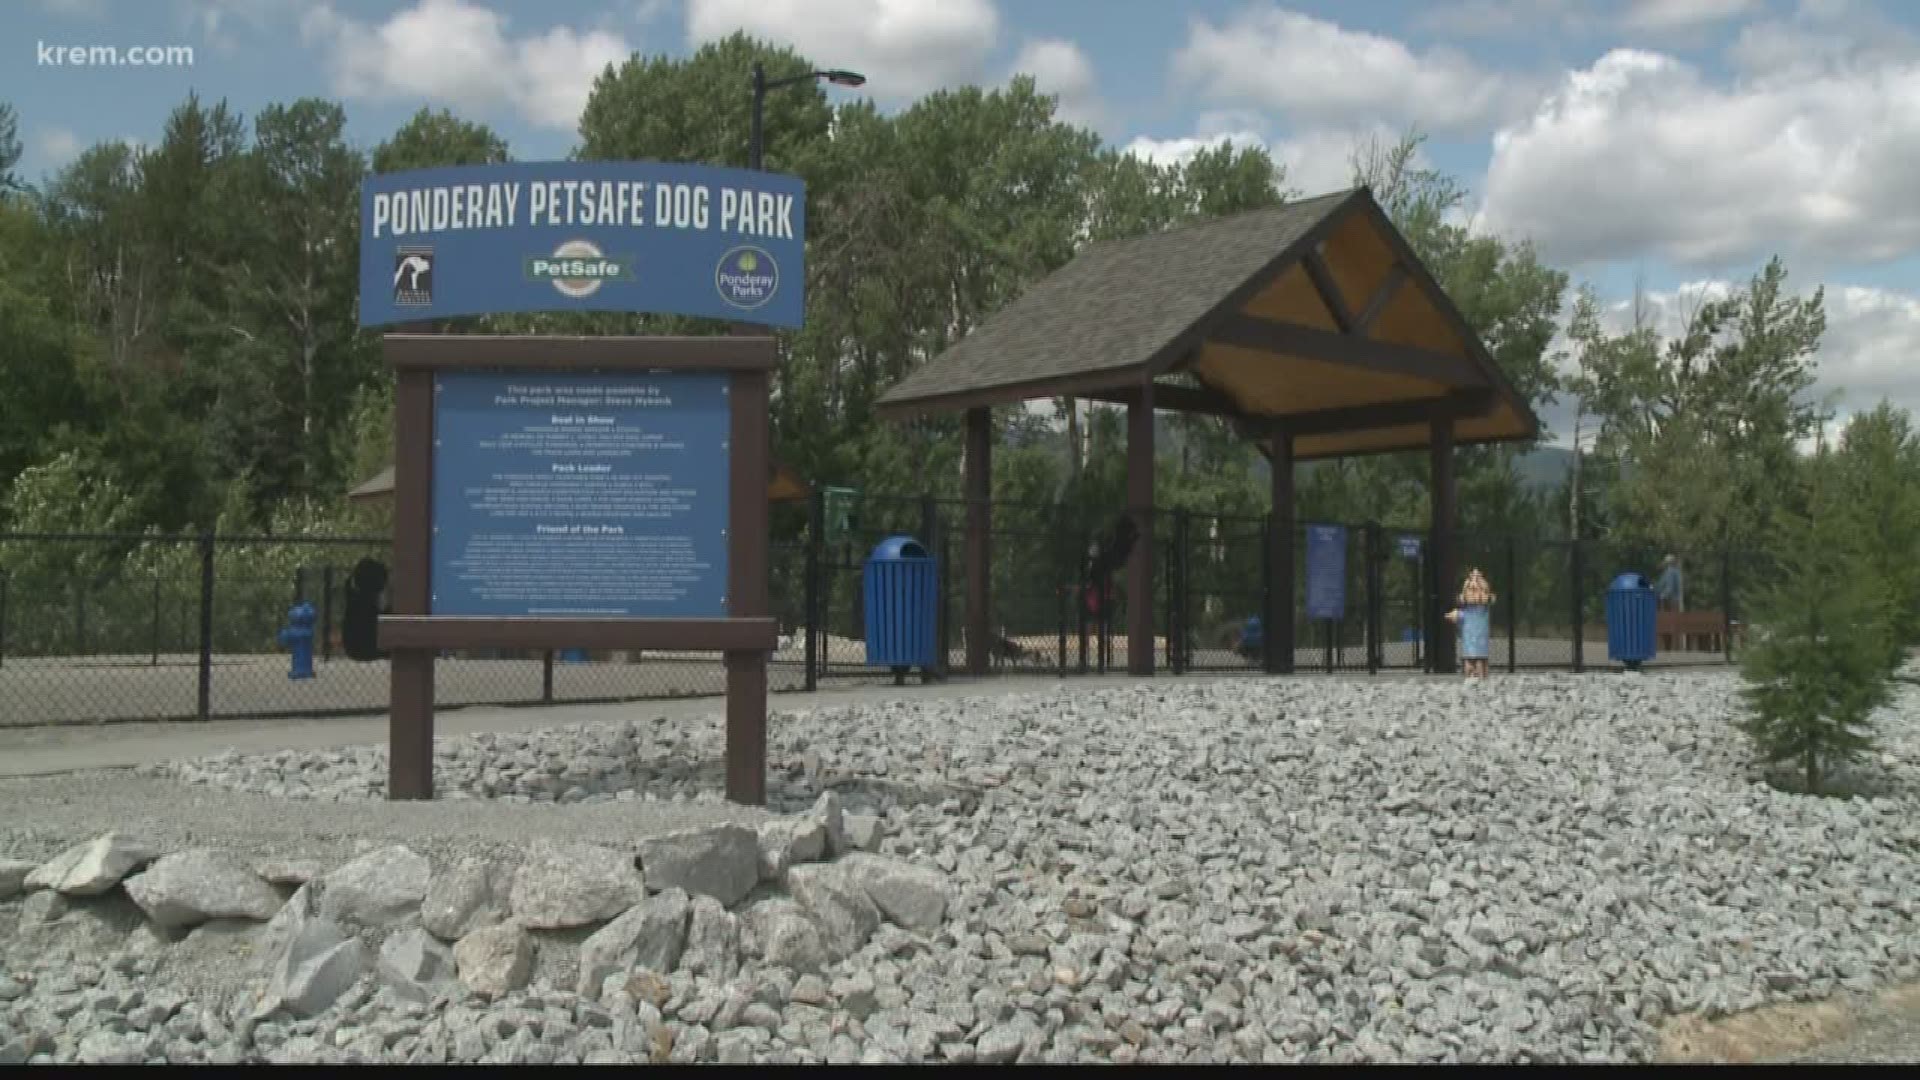 Organizers say the park in Ponderay is the first in the U.S. to be fully compliant with the Americans with Disabilities Act.